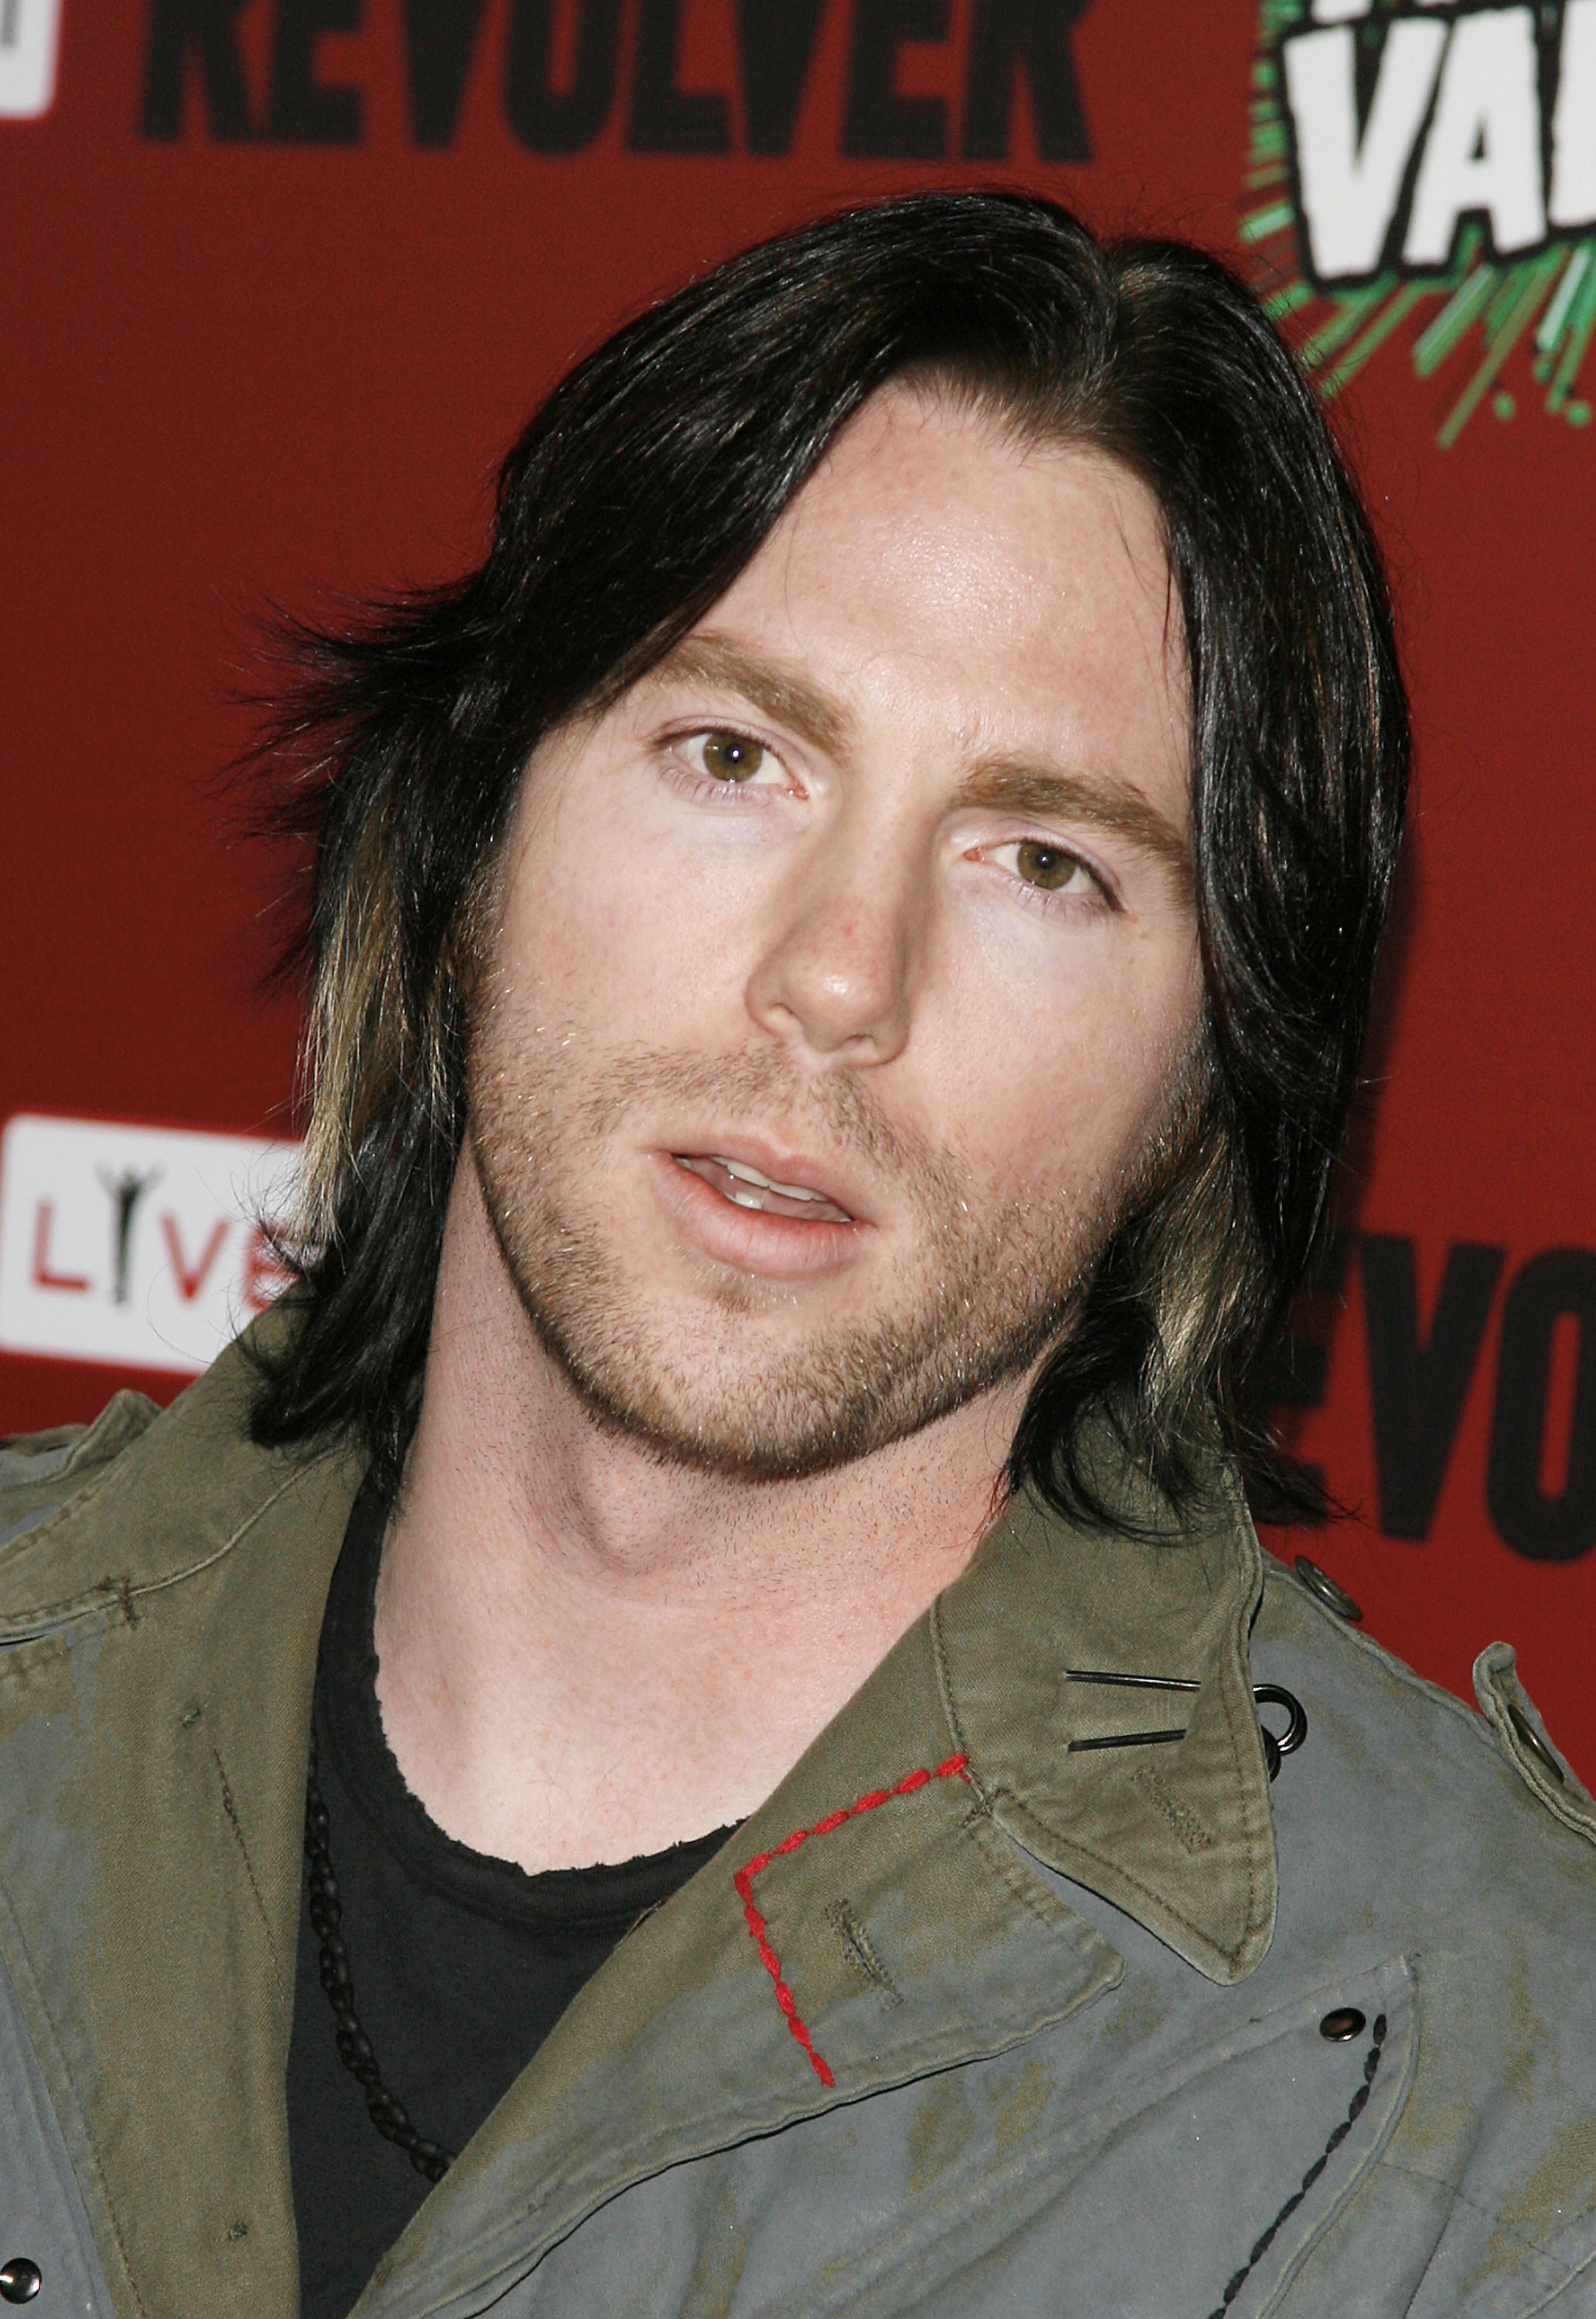 Elijah Blue Allman arrives at Korn's Family Values Tour Kickoff Party at Hollywood Forever Cemetery in Los Angeles, California on April 19, 2007. | Source: Getty Images